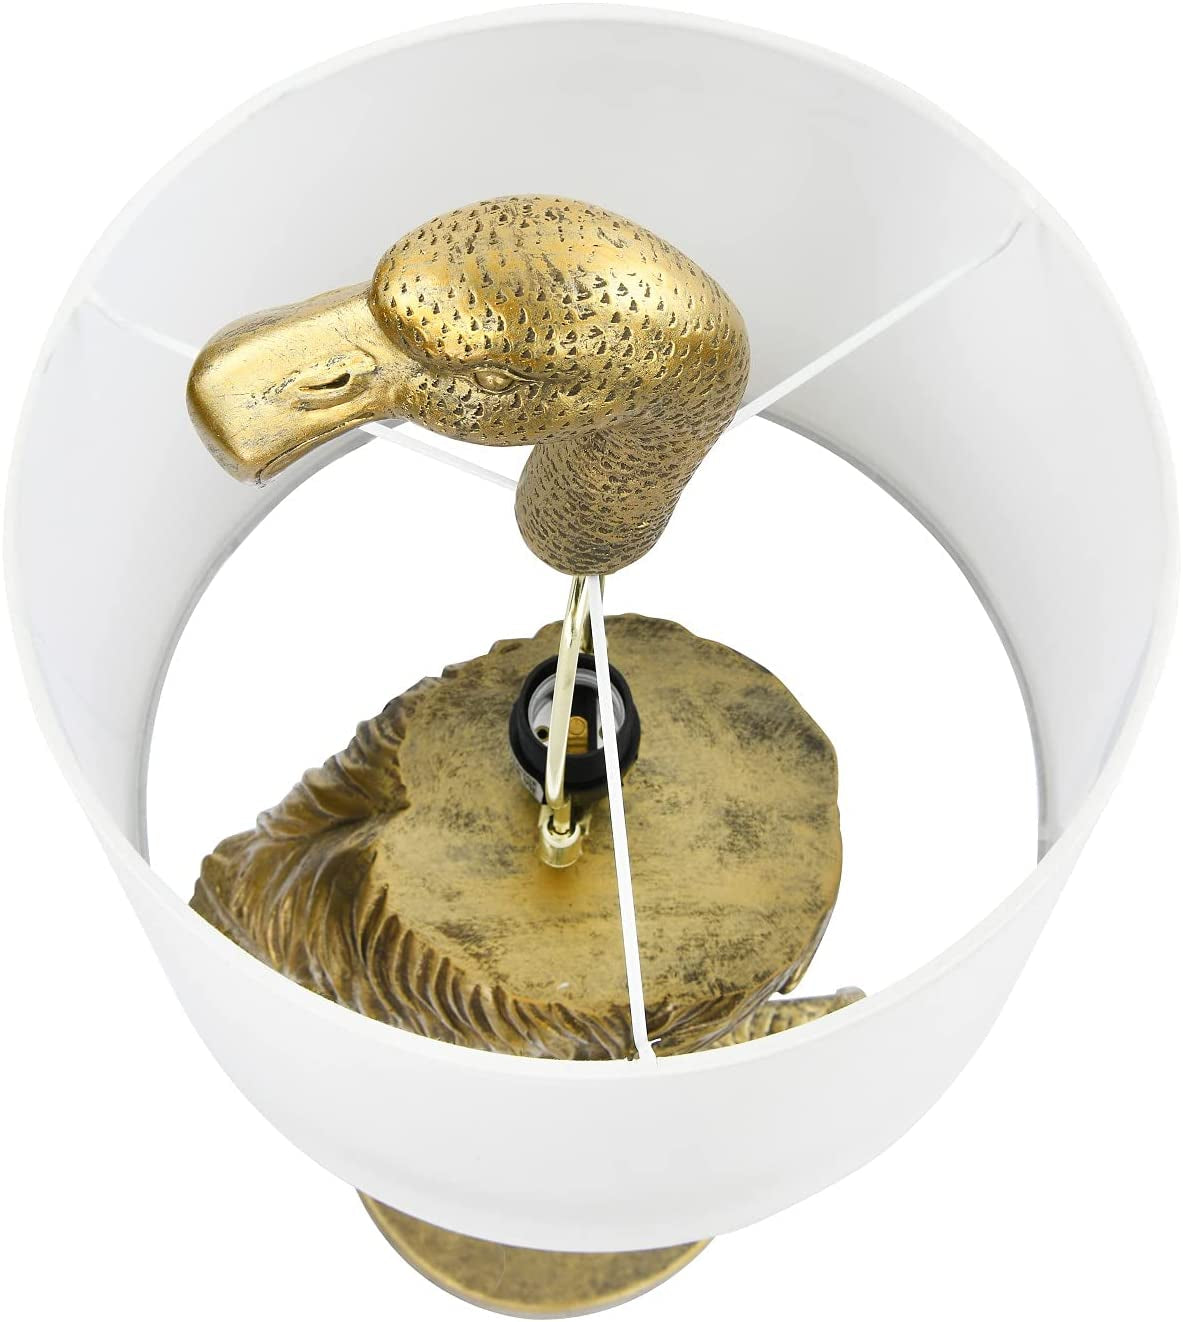 Resin Flamingo Table Lamp with Linen Shade, Gold Finish